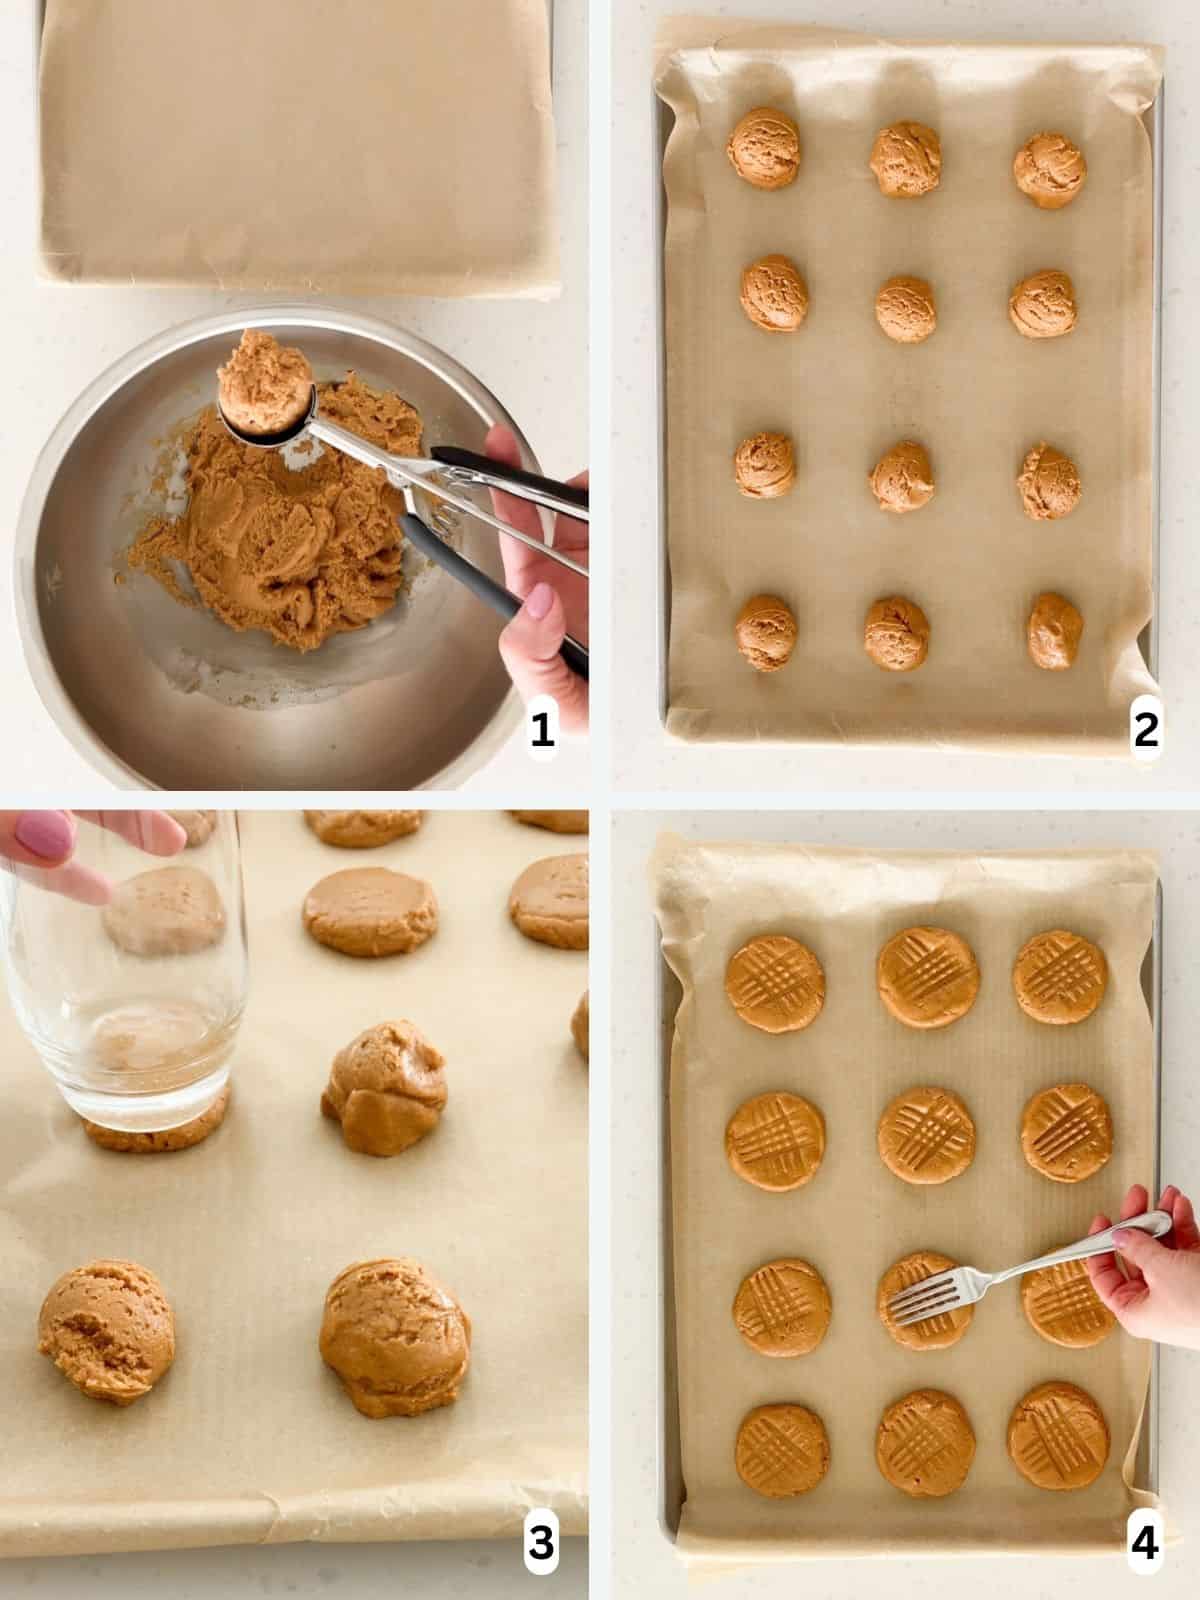 Peanut butter cookies are scooped and shaped on a baking sheet.